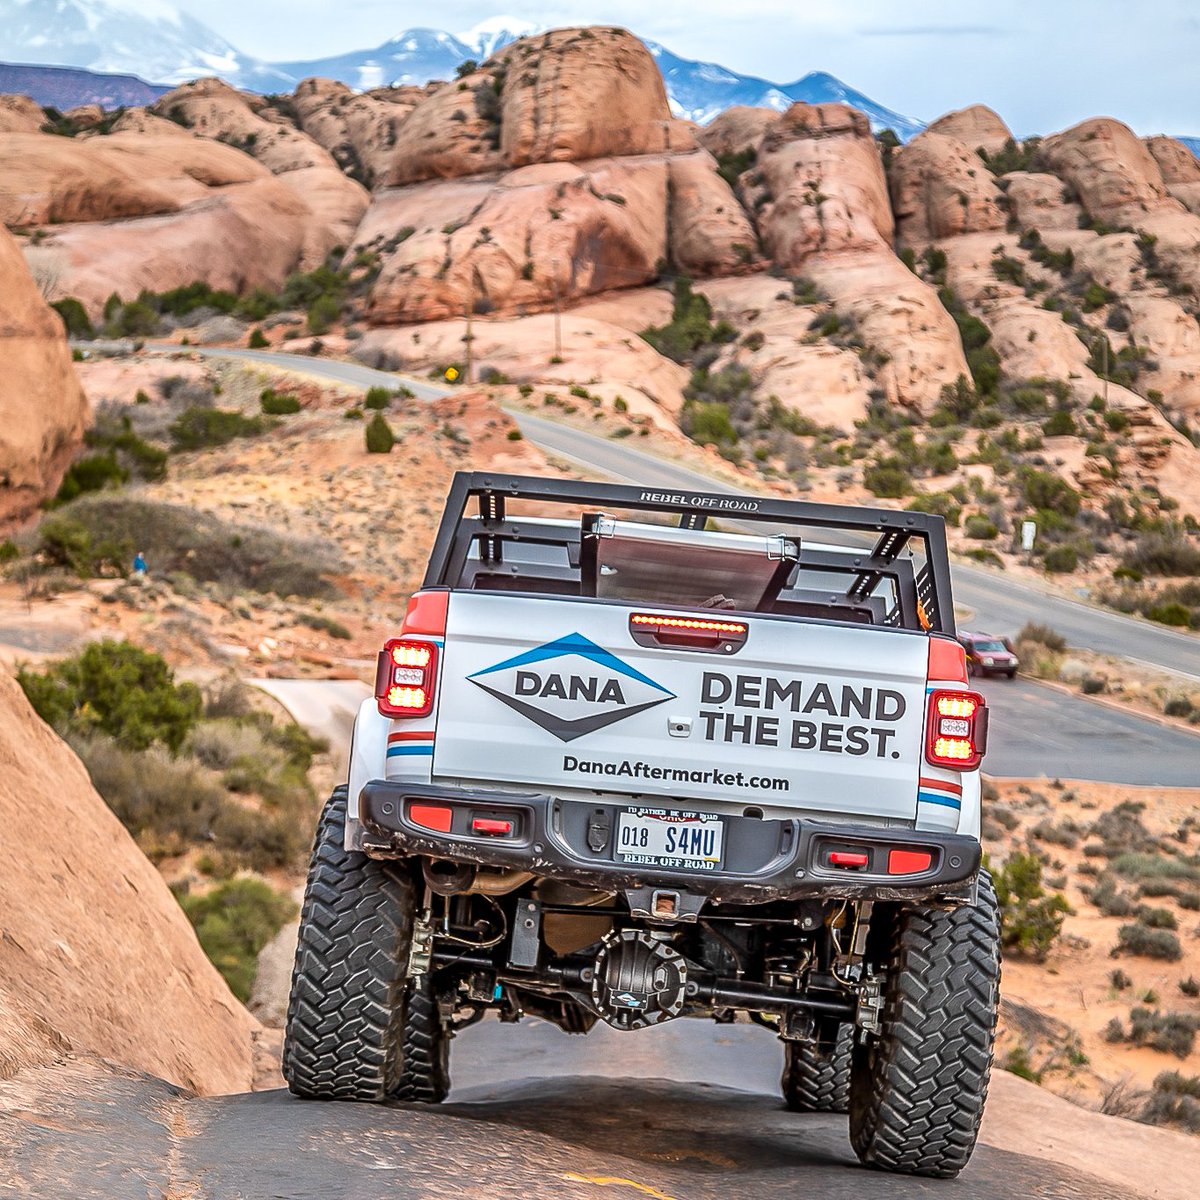 We’re reminiscing about warmer days ☀️ The treacherous Moab terrain at #EasterJeepSafari was no match for our well-equipped Jeep Gladiator. Riding on front and rear Ultimate Dana 60® axles, the JT traversed rough backcountry terrain with ease! bit.ly/3J4vNdn